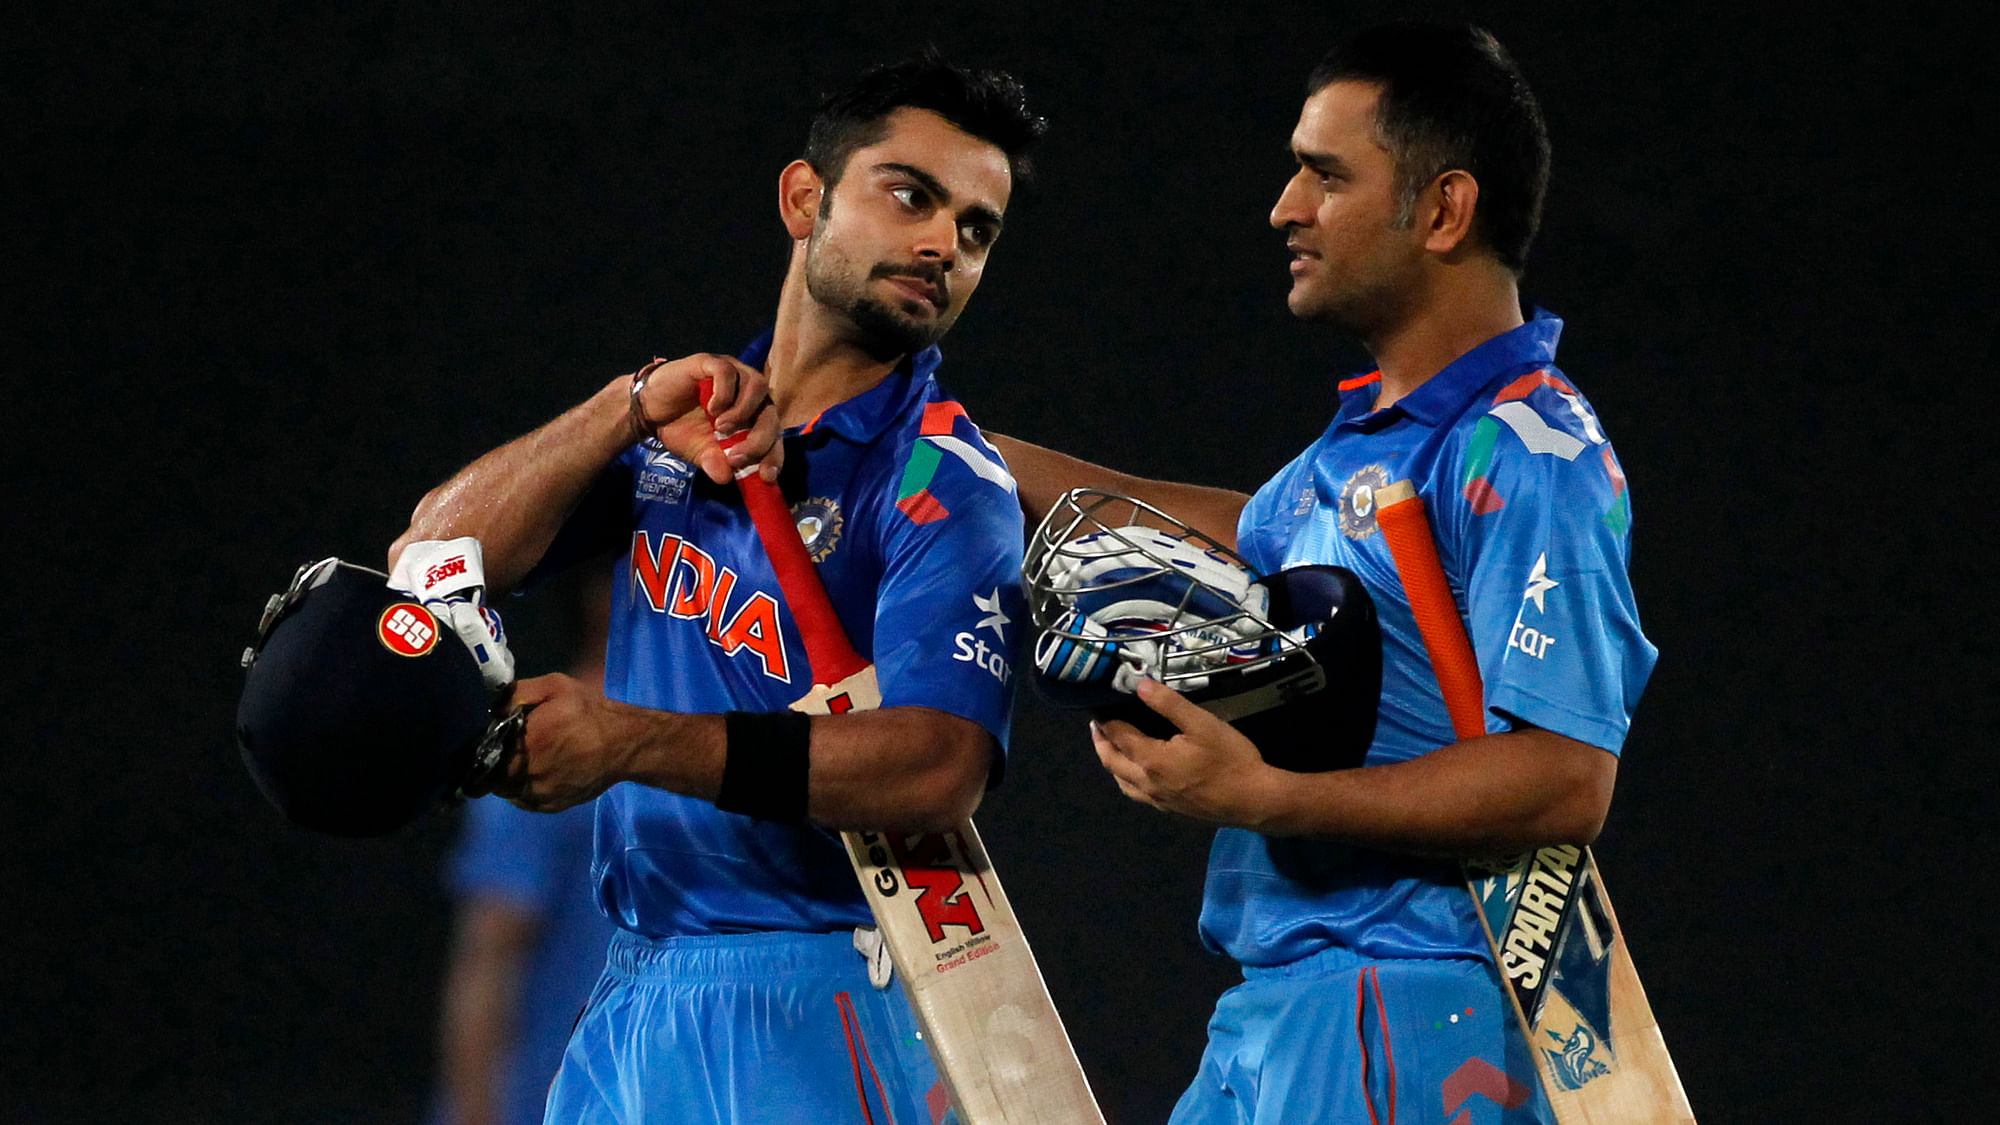 Virat Kohli and MS Dhoni during the ICC Twenty20 World Cup in 2014. (Photo: Reuters)